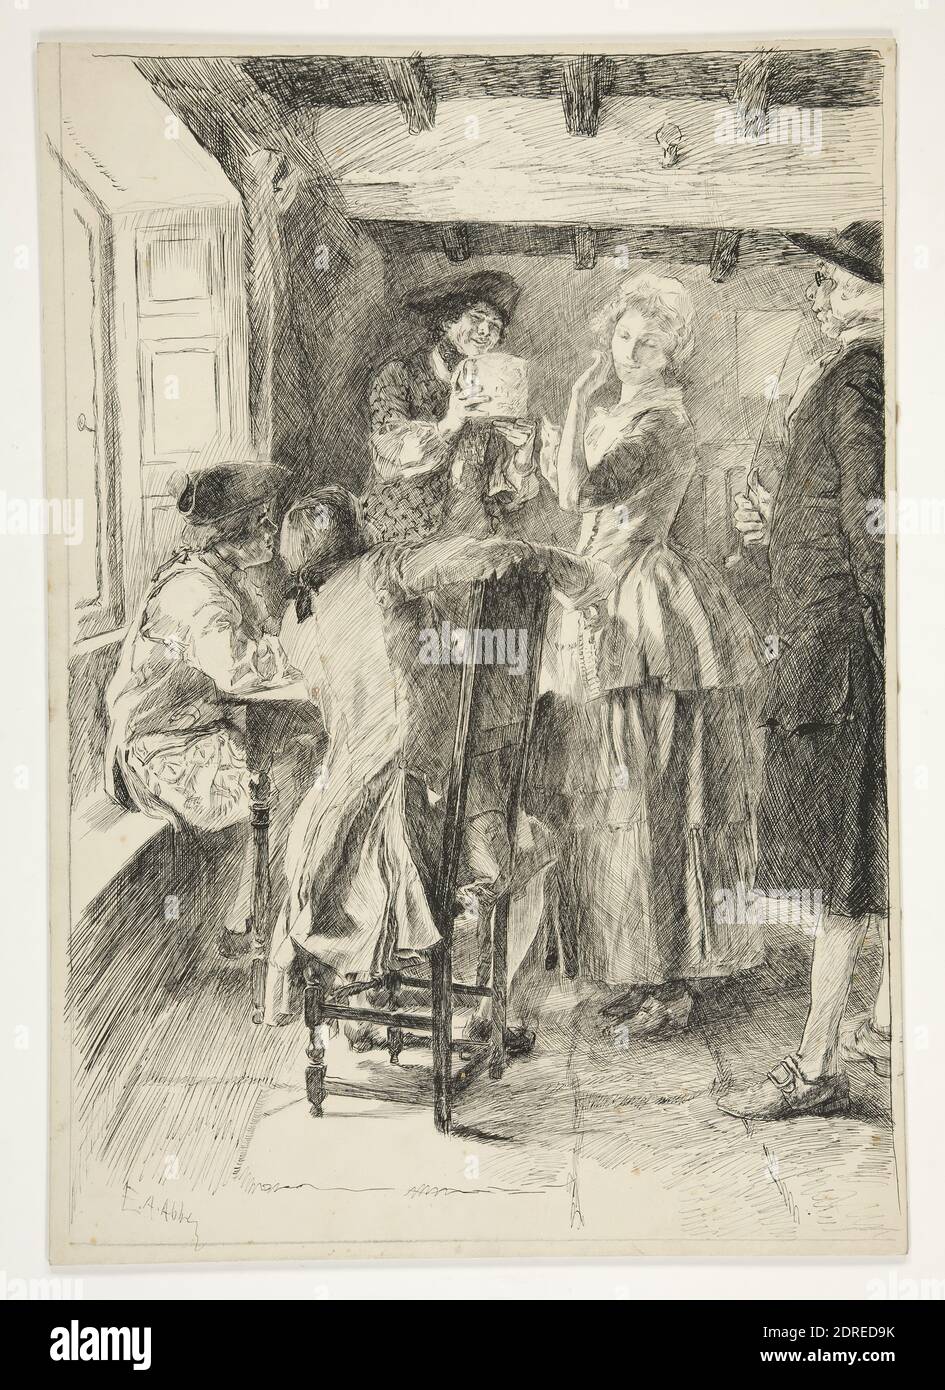 Artist: Edwin Austin Abbey, American, 1852–1911, M.A., 1897, Nor the coy maid shall kiss the cup…, illustration to Oliver Goldsmith’s The Deserted Village, 19th century, Pen and ink on illustration board, Sheet: 52.07 × 37.465 cm (20 1/2 × 14 3/4in.), Made in United States, American, 19th century, Works on Paper - Drawings and Watercolors Stock Photo